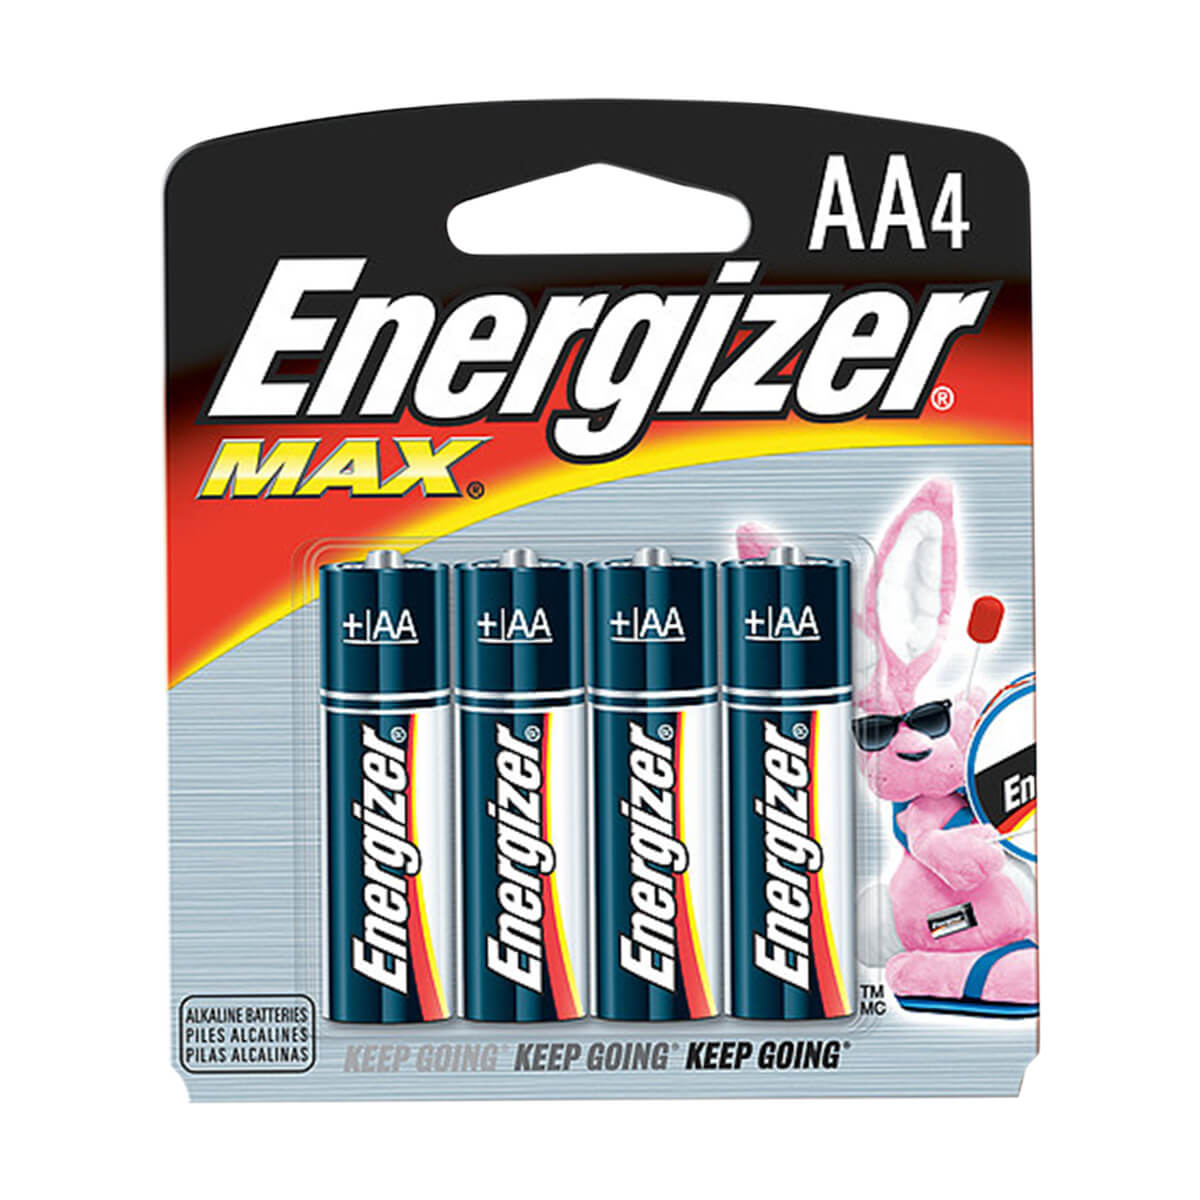 Energizer® AA Batteries - 4 Pack